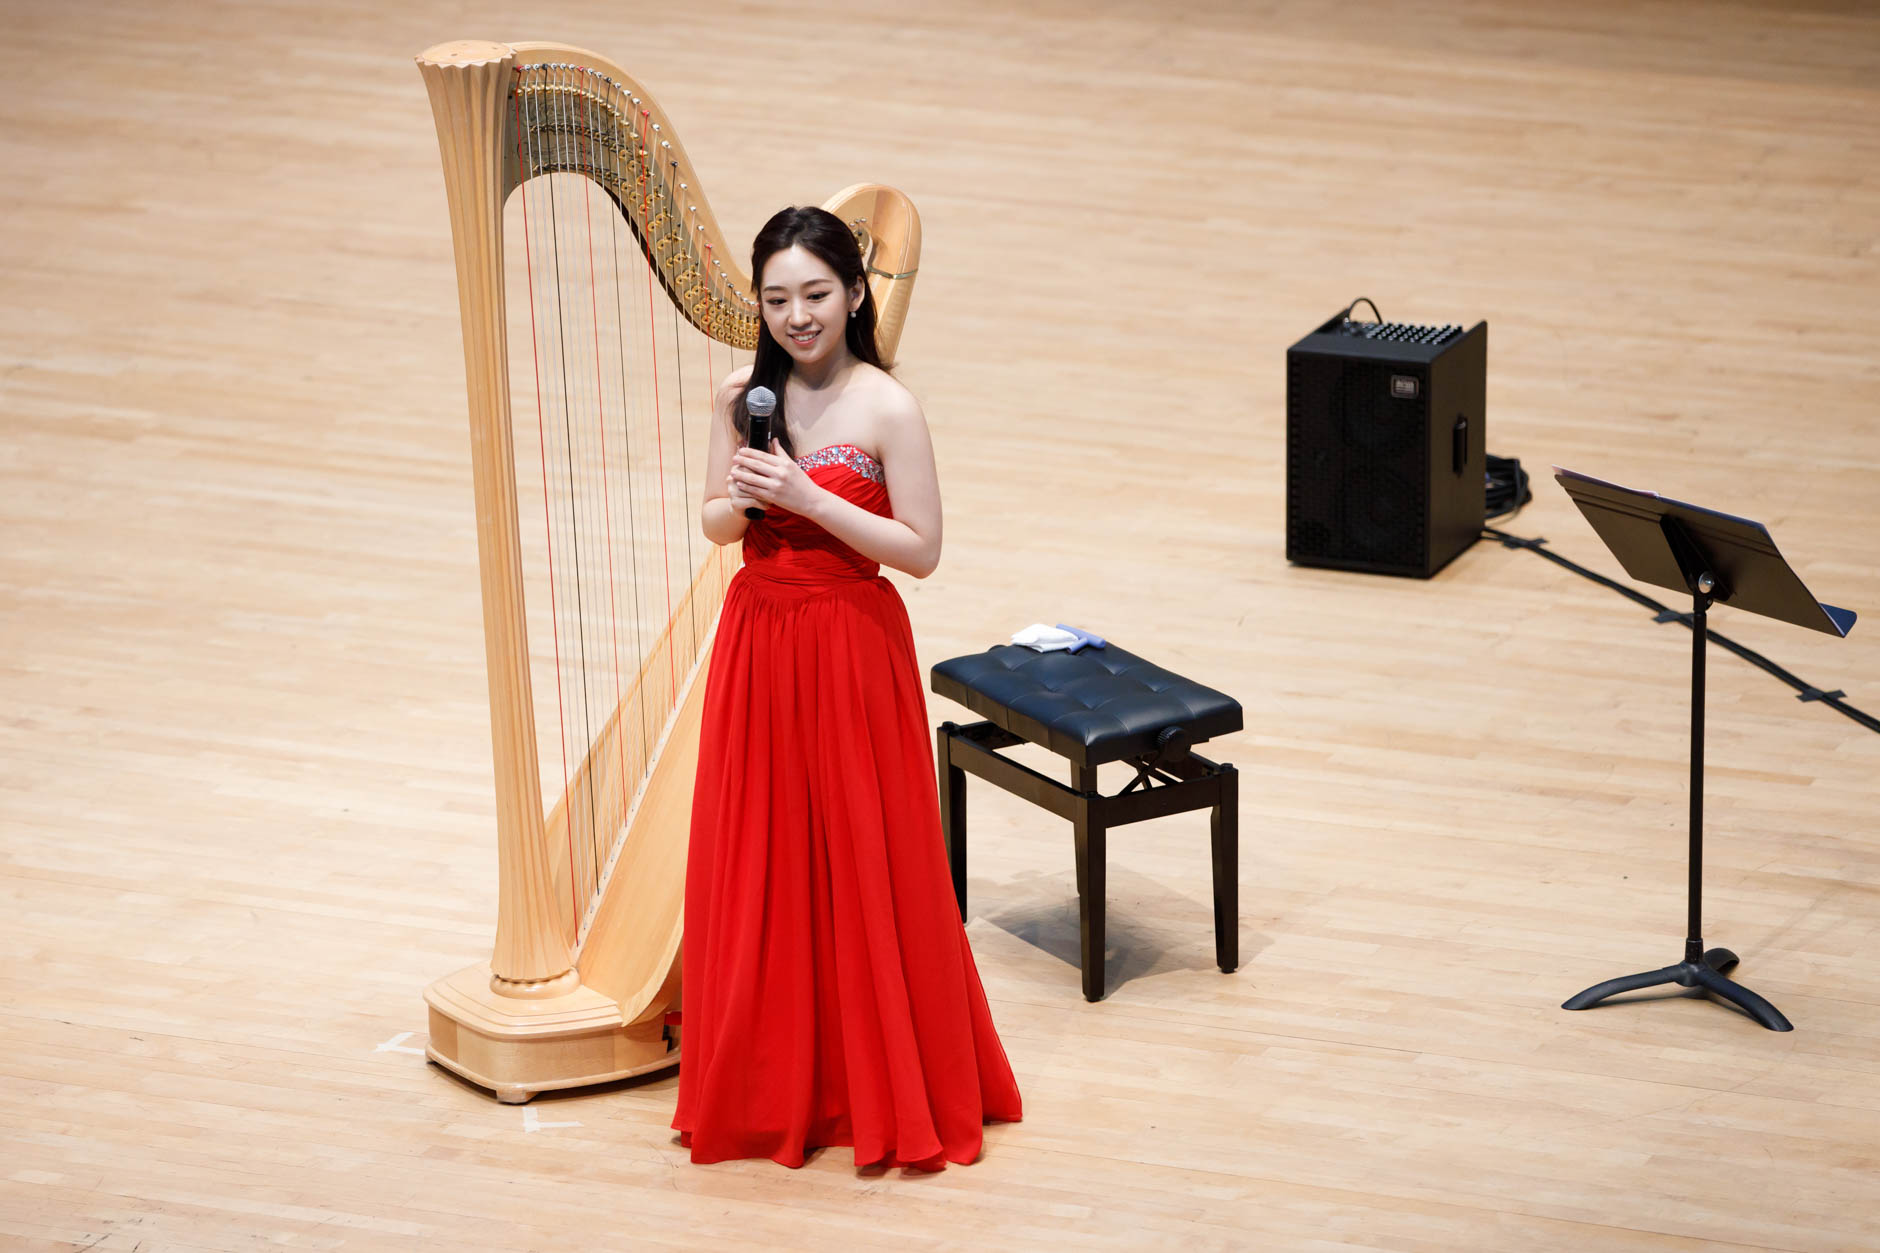 Se Hee Hwang from South Korea speaks before performing during Stage III at the 11th USA International Harp Competition at Indiana University in Bloomington, Indiana on Wednesday, July 10, 2019. (Photo by James Brosher)